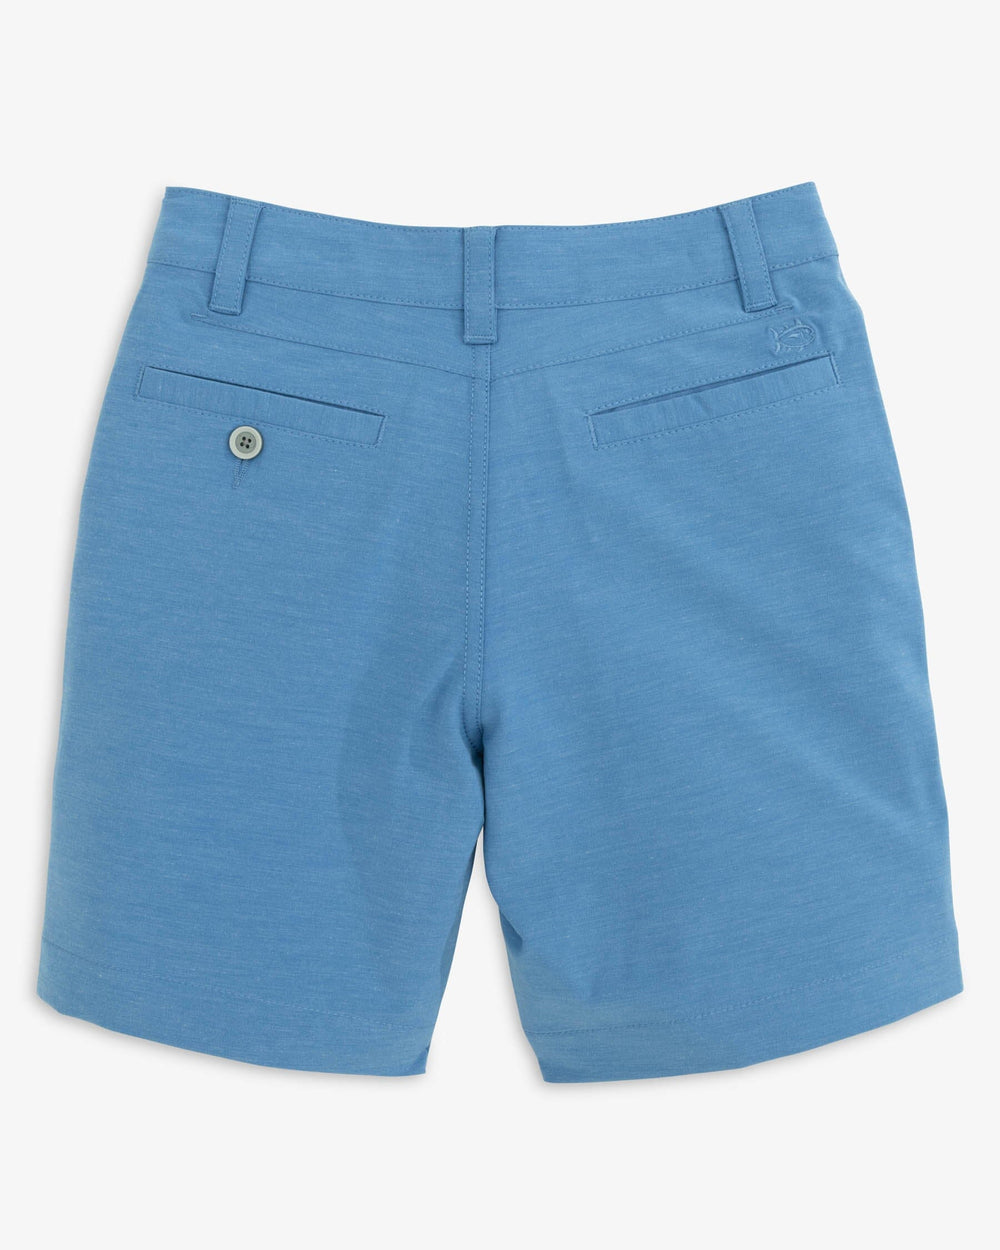 The back view of the Southern Tide Boys Heathered T3 Gulf Short by Southern Tide - Heather Atlantic Blue